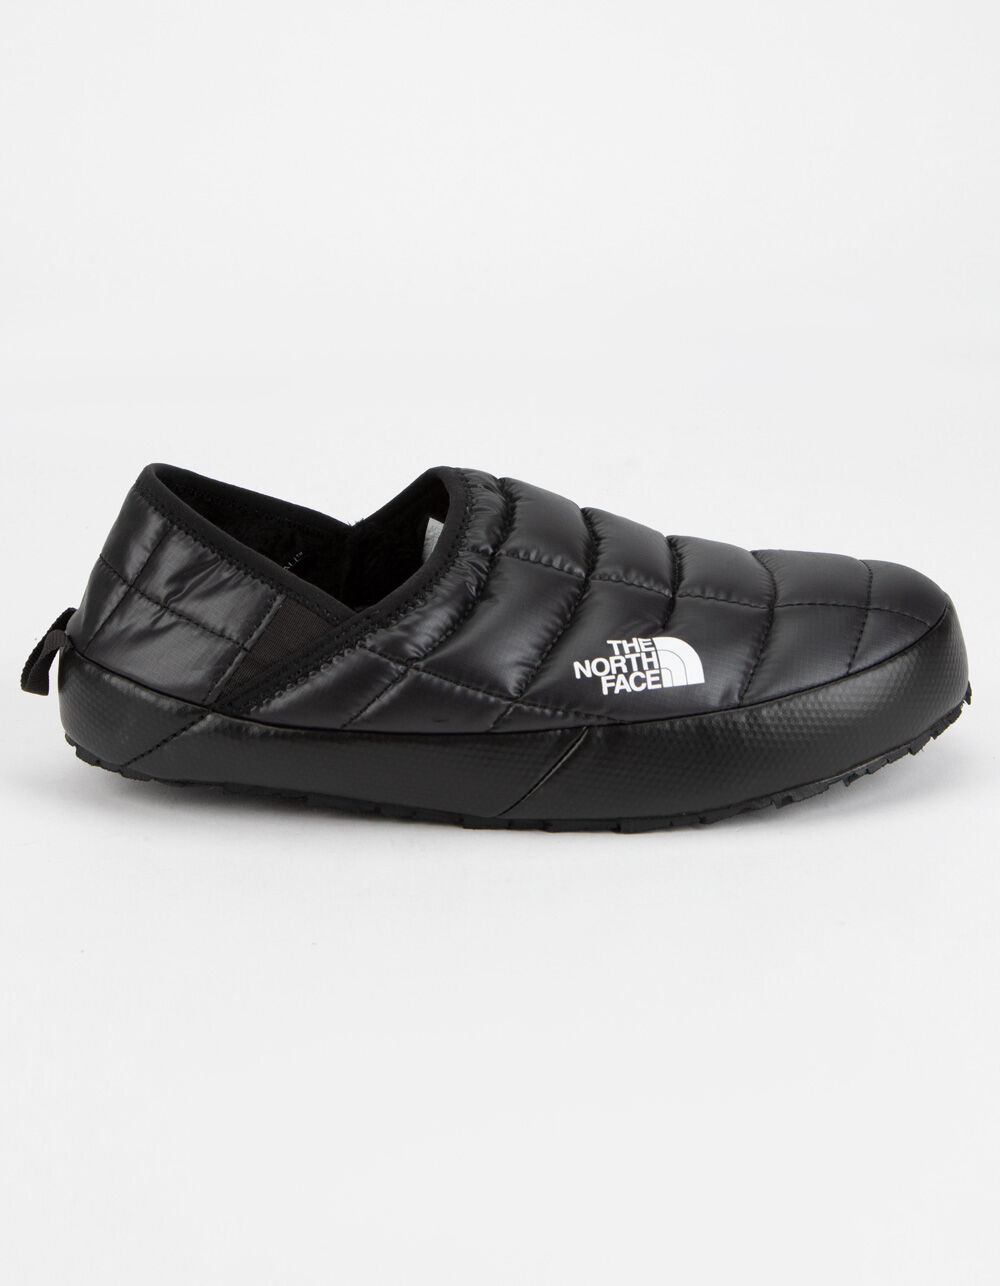 THE NORTH FACE Thermoball Traction Womens Slippers - BLACK | Tillys